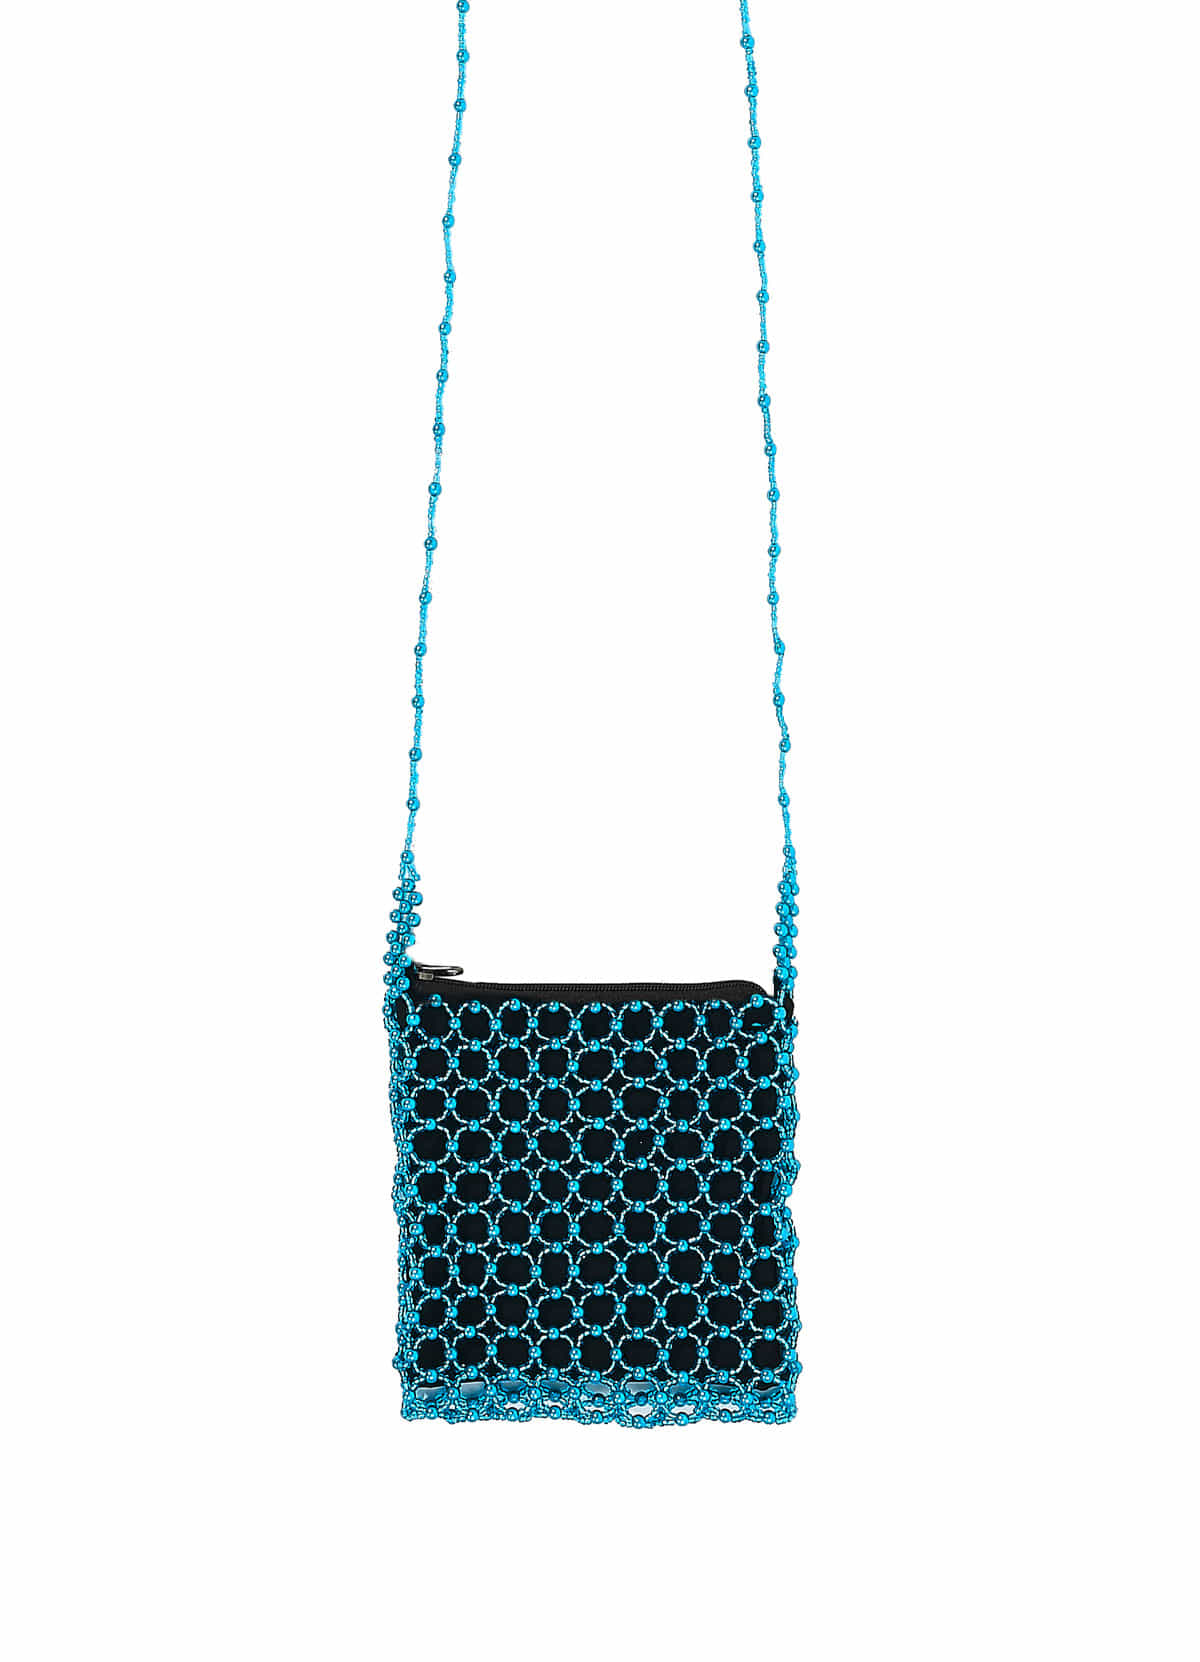 [Limited] Beads Bag